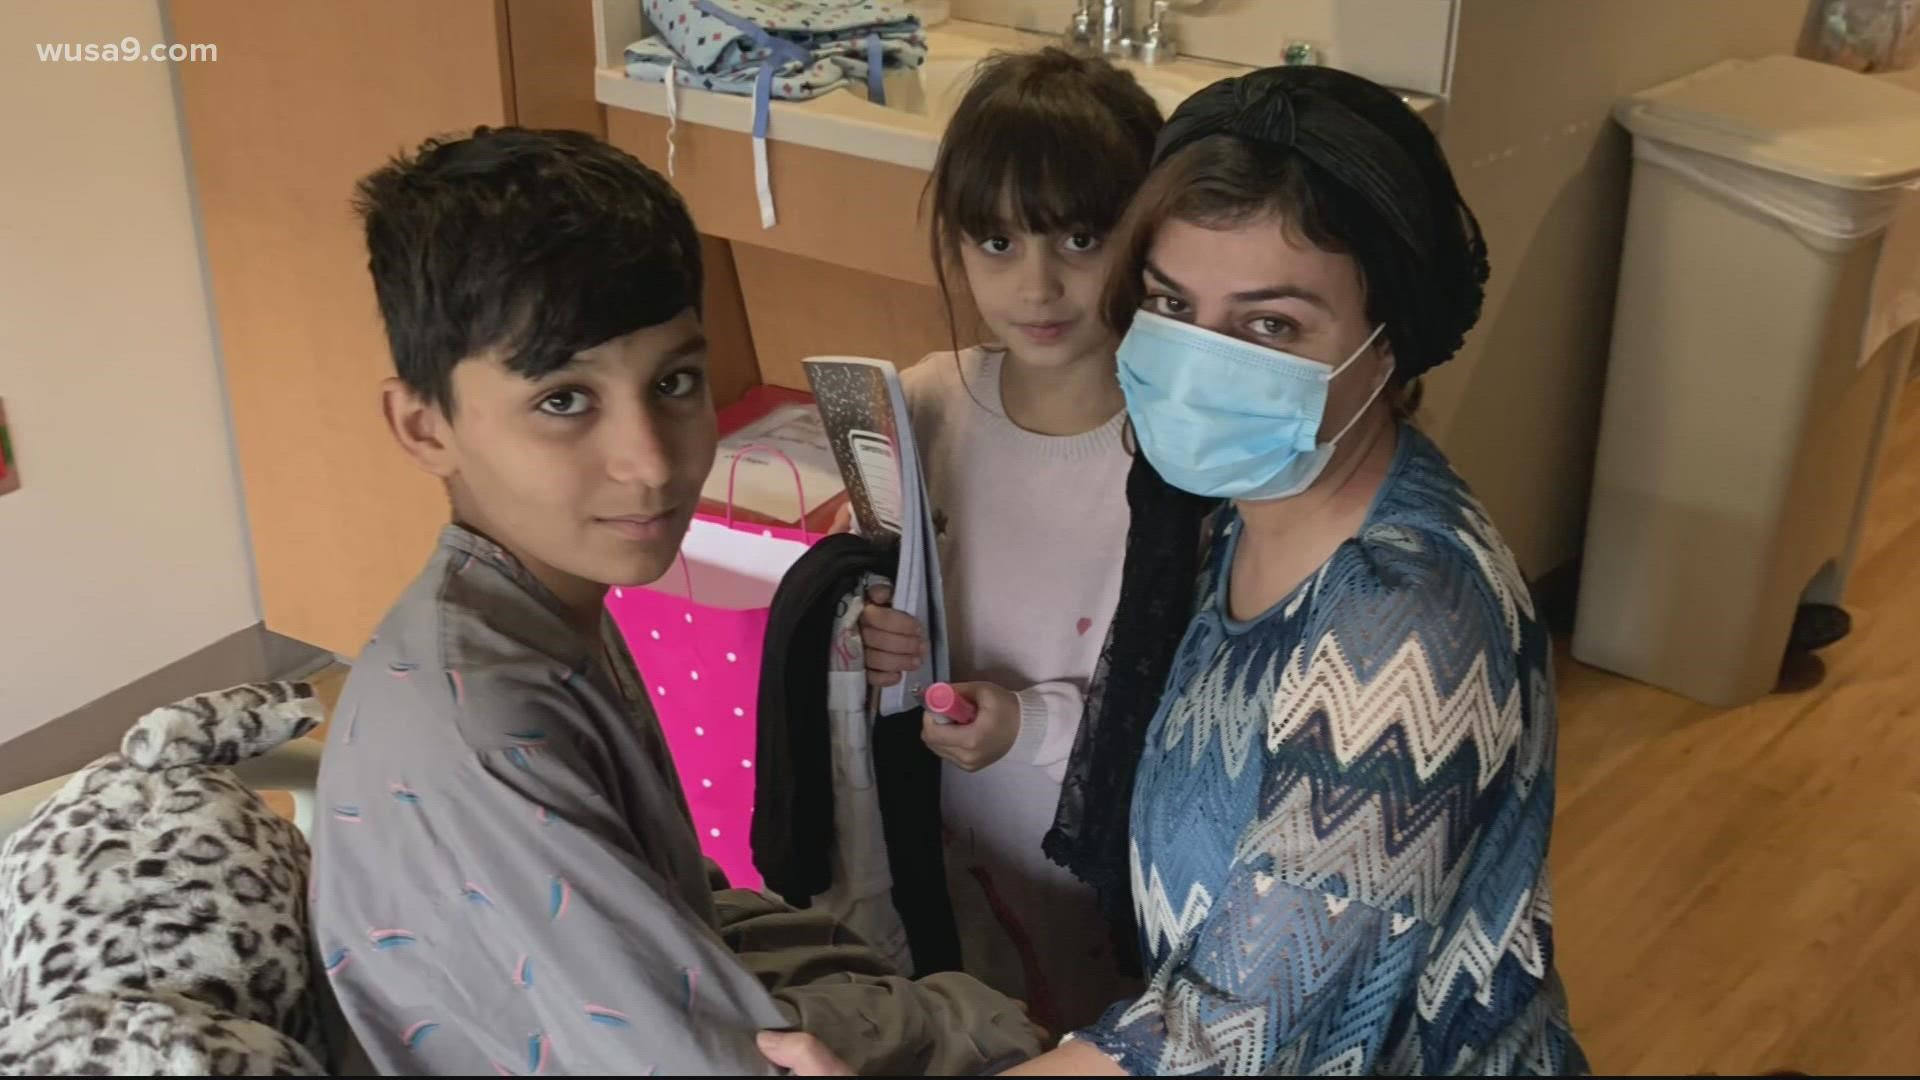 The children's mother was killed in the airport explosion that killed dozens of people in Kabul. Now they are reunited with family members on U.S. soil